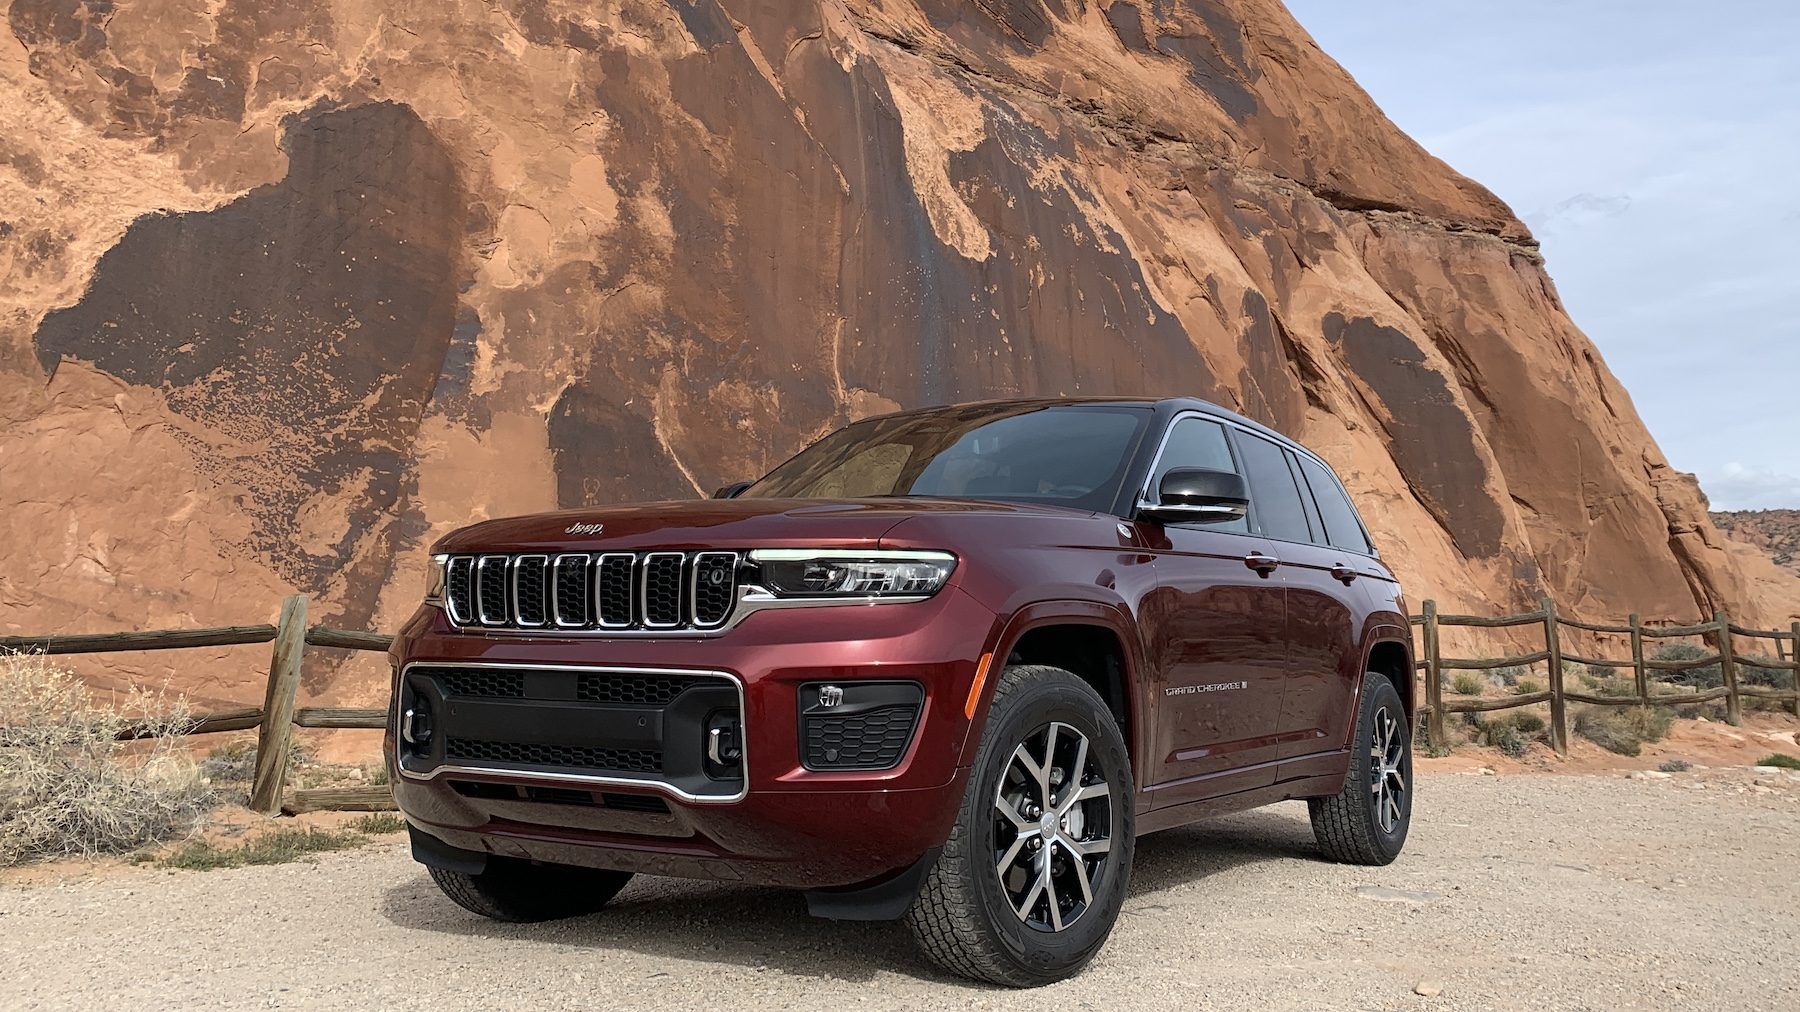 Trusty V6 or cutting-edge PHEV? Which Jeep Grand Cherokee powertrain is right for you?